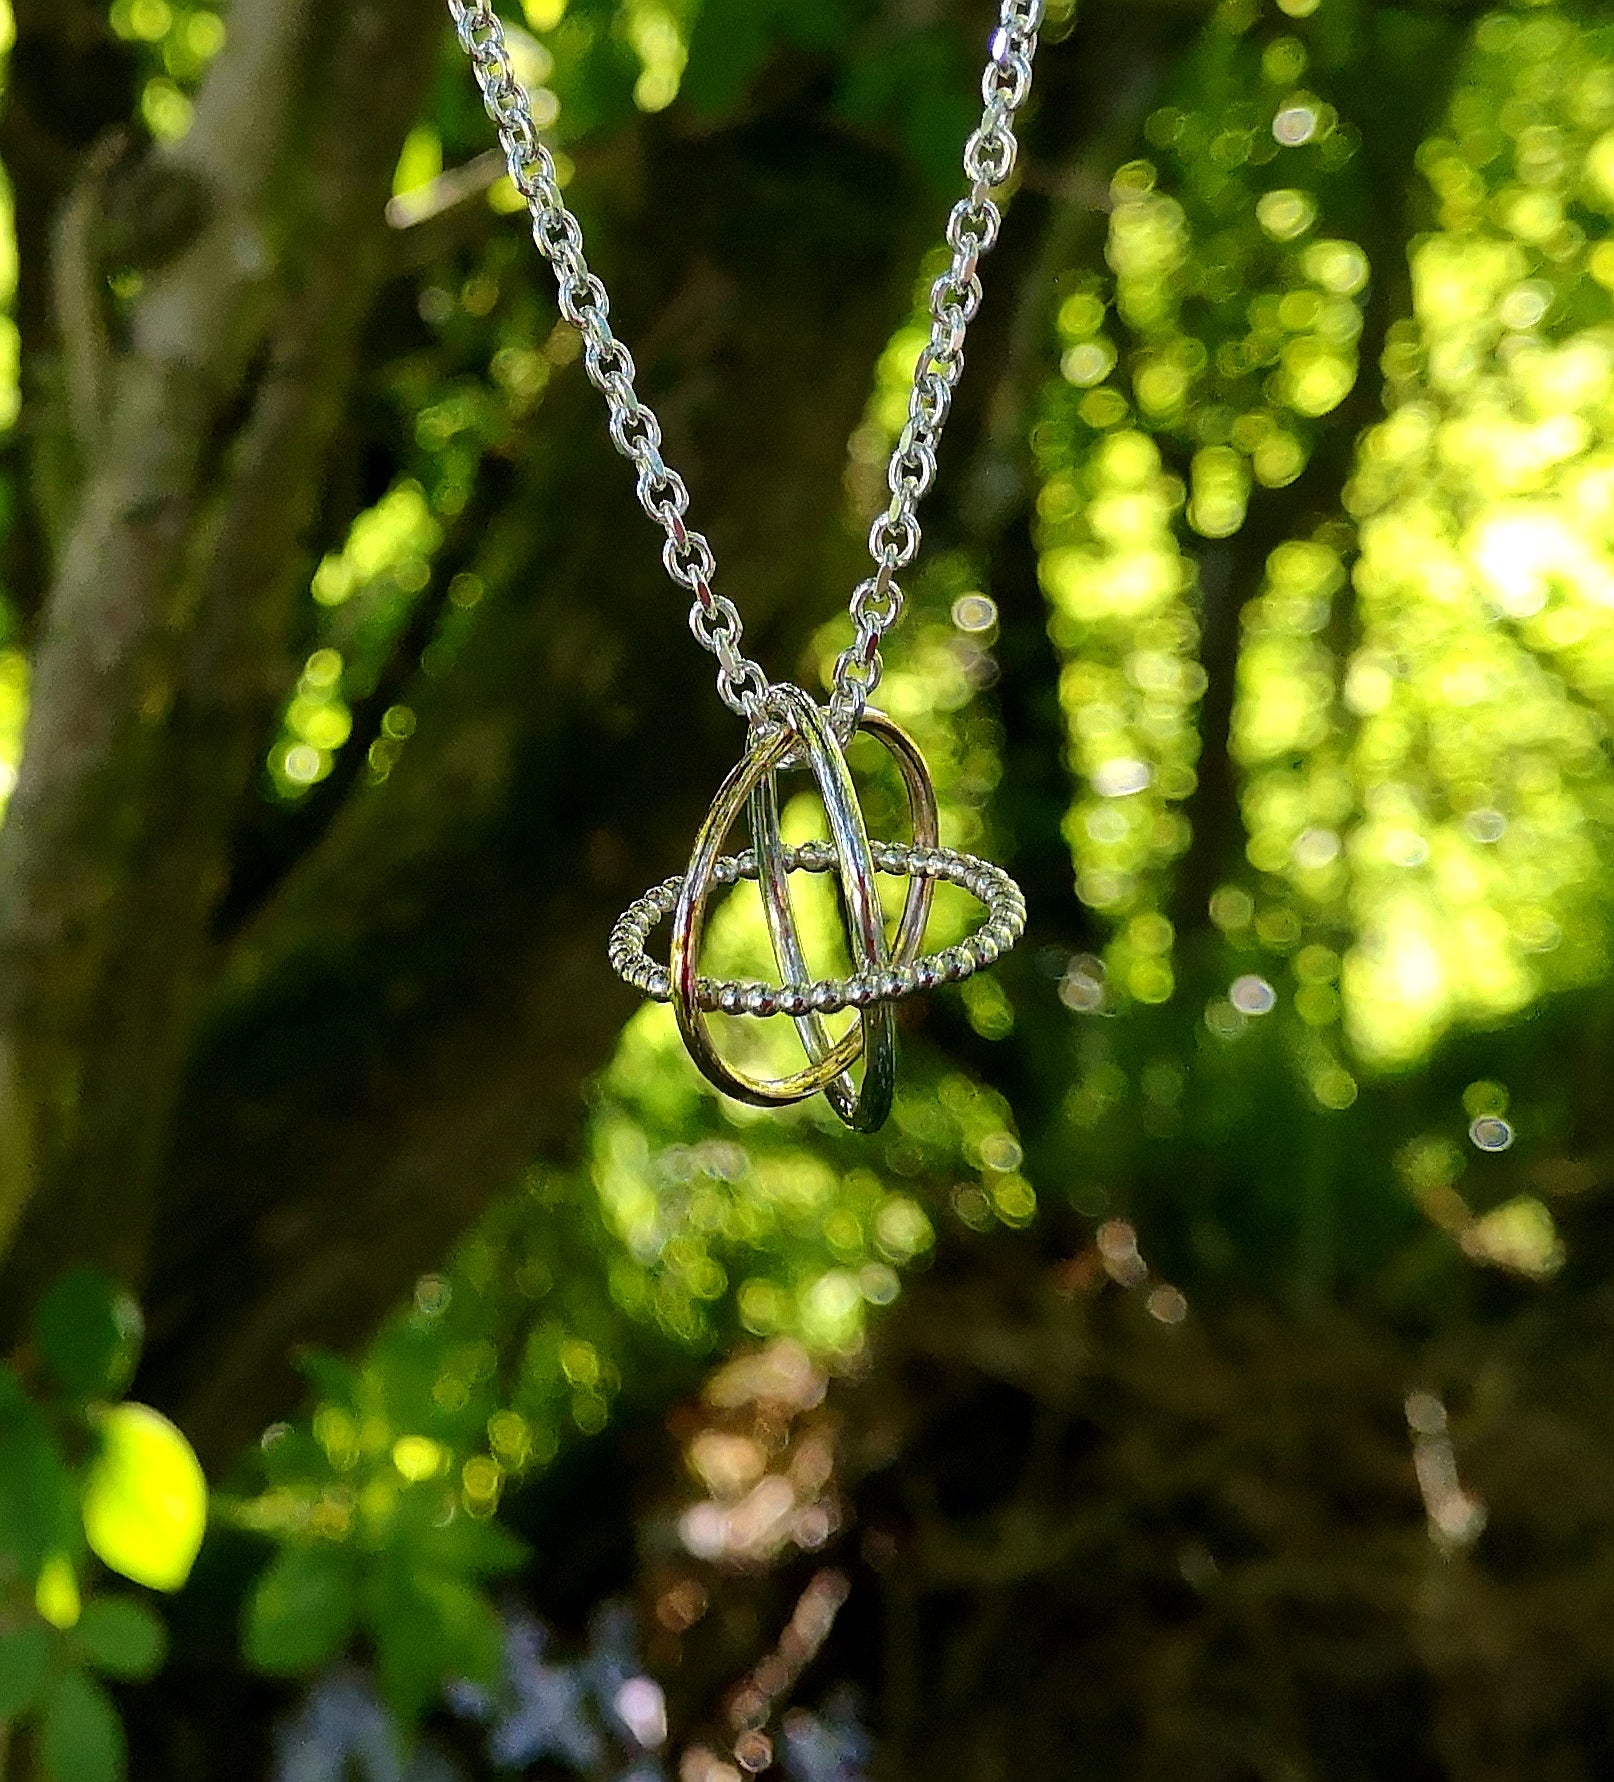 The Cúrsa an tSaoil Circles of Life pendant is handcrafted by Elena Brennan Jewellery.